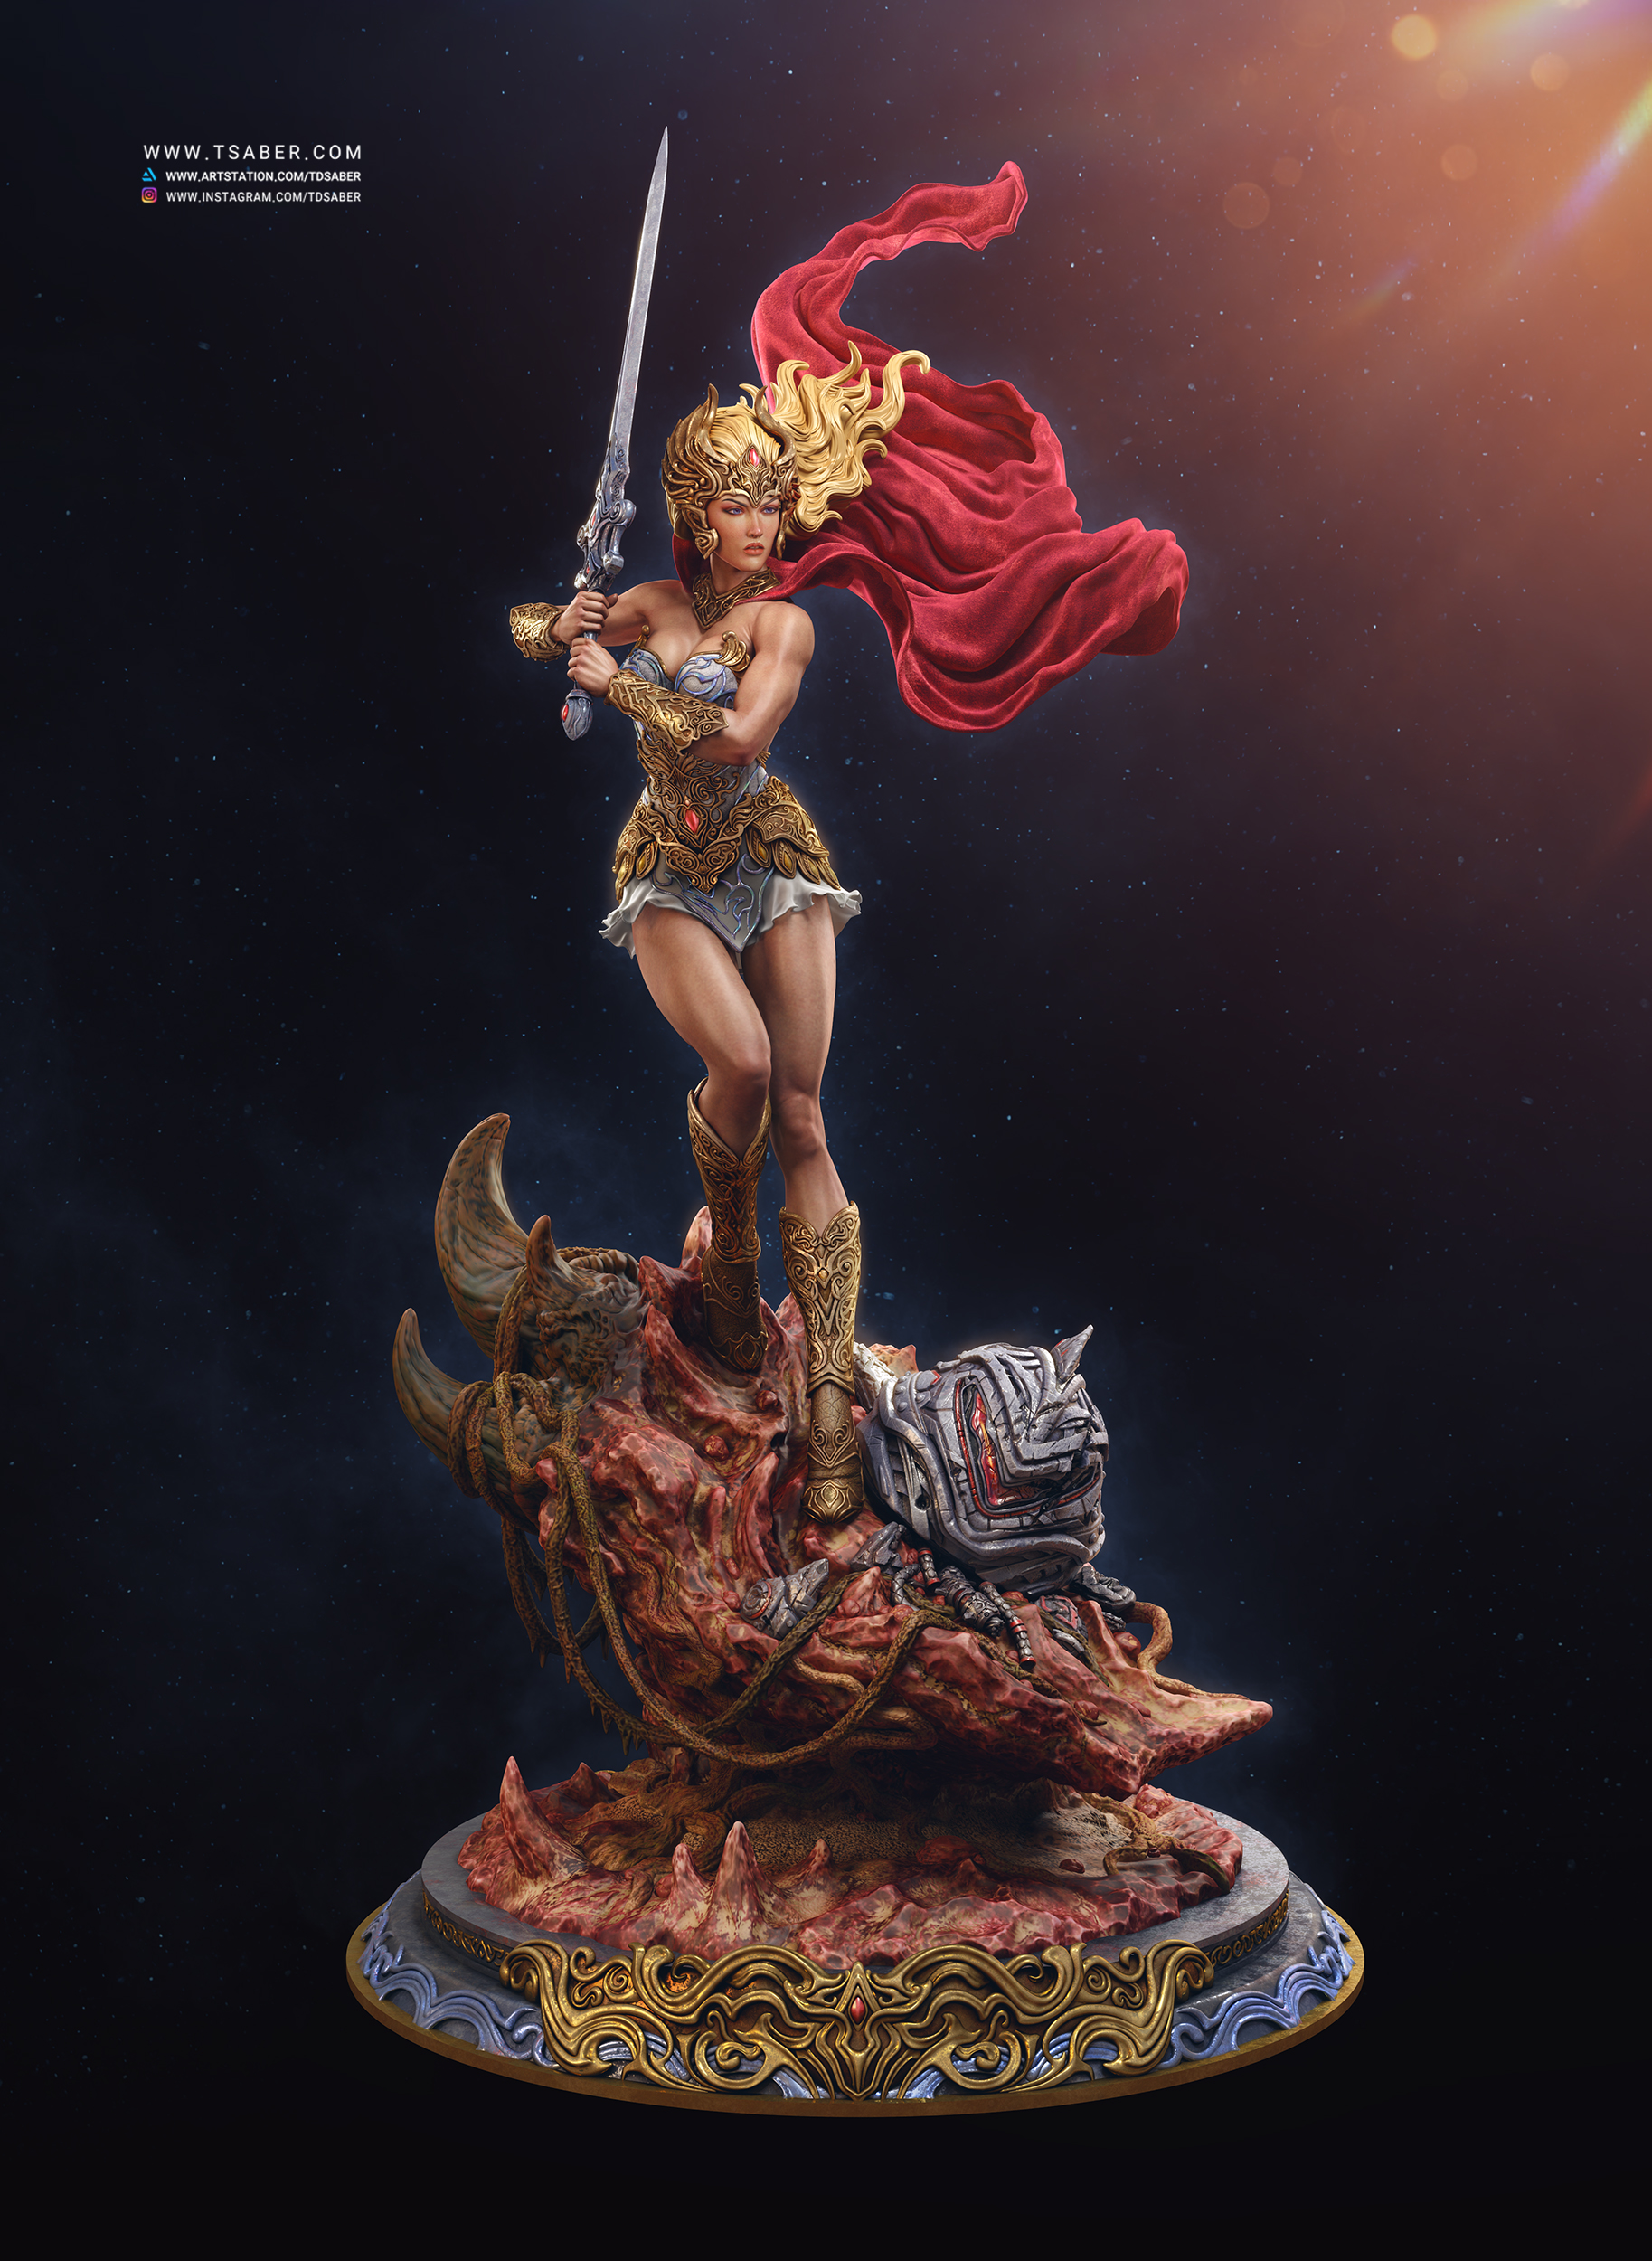 Shera Statue - Masters of the Universe – Princess Of Power - Collectible statue figurine – Tsaber - Render 01